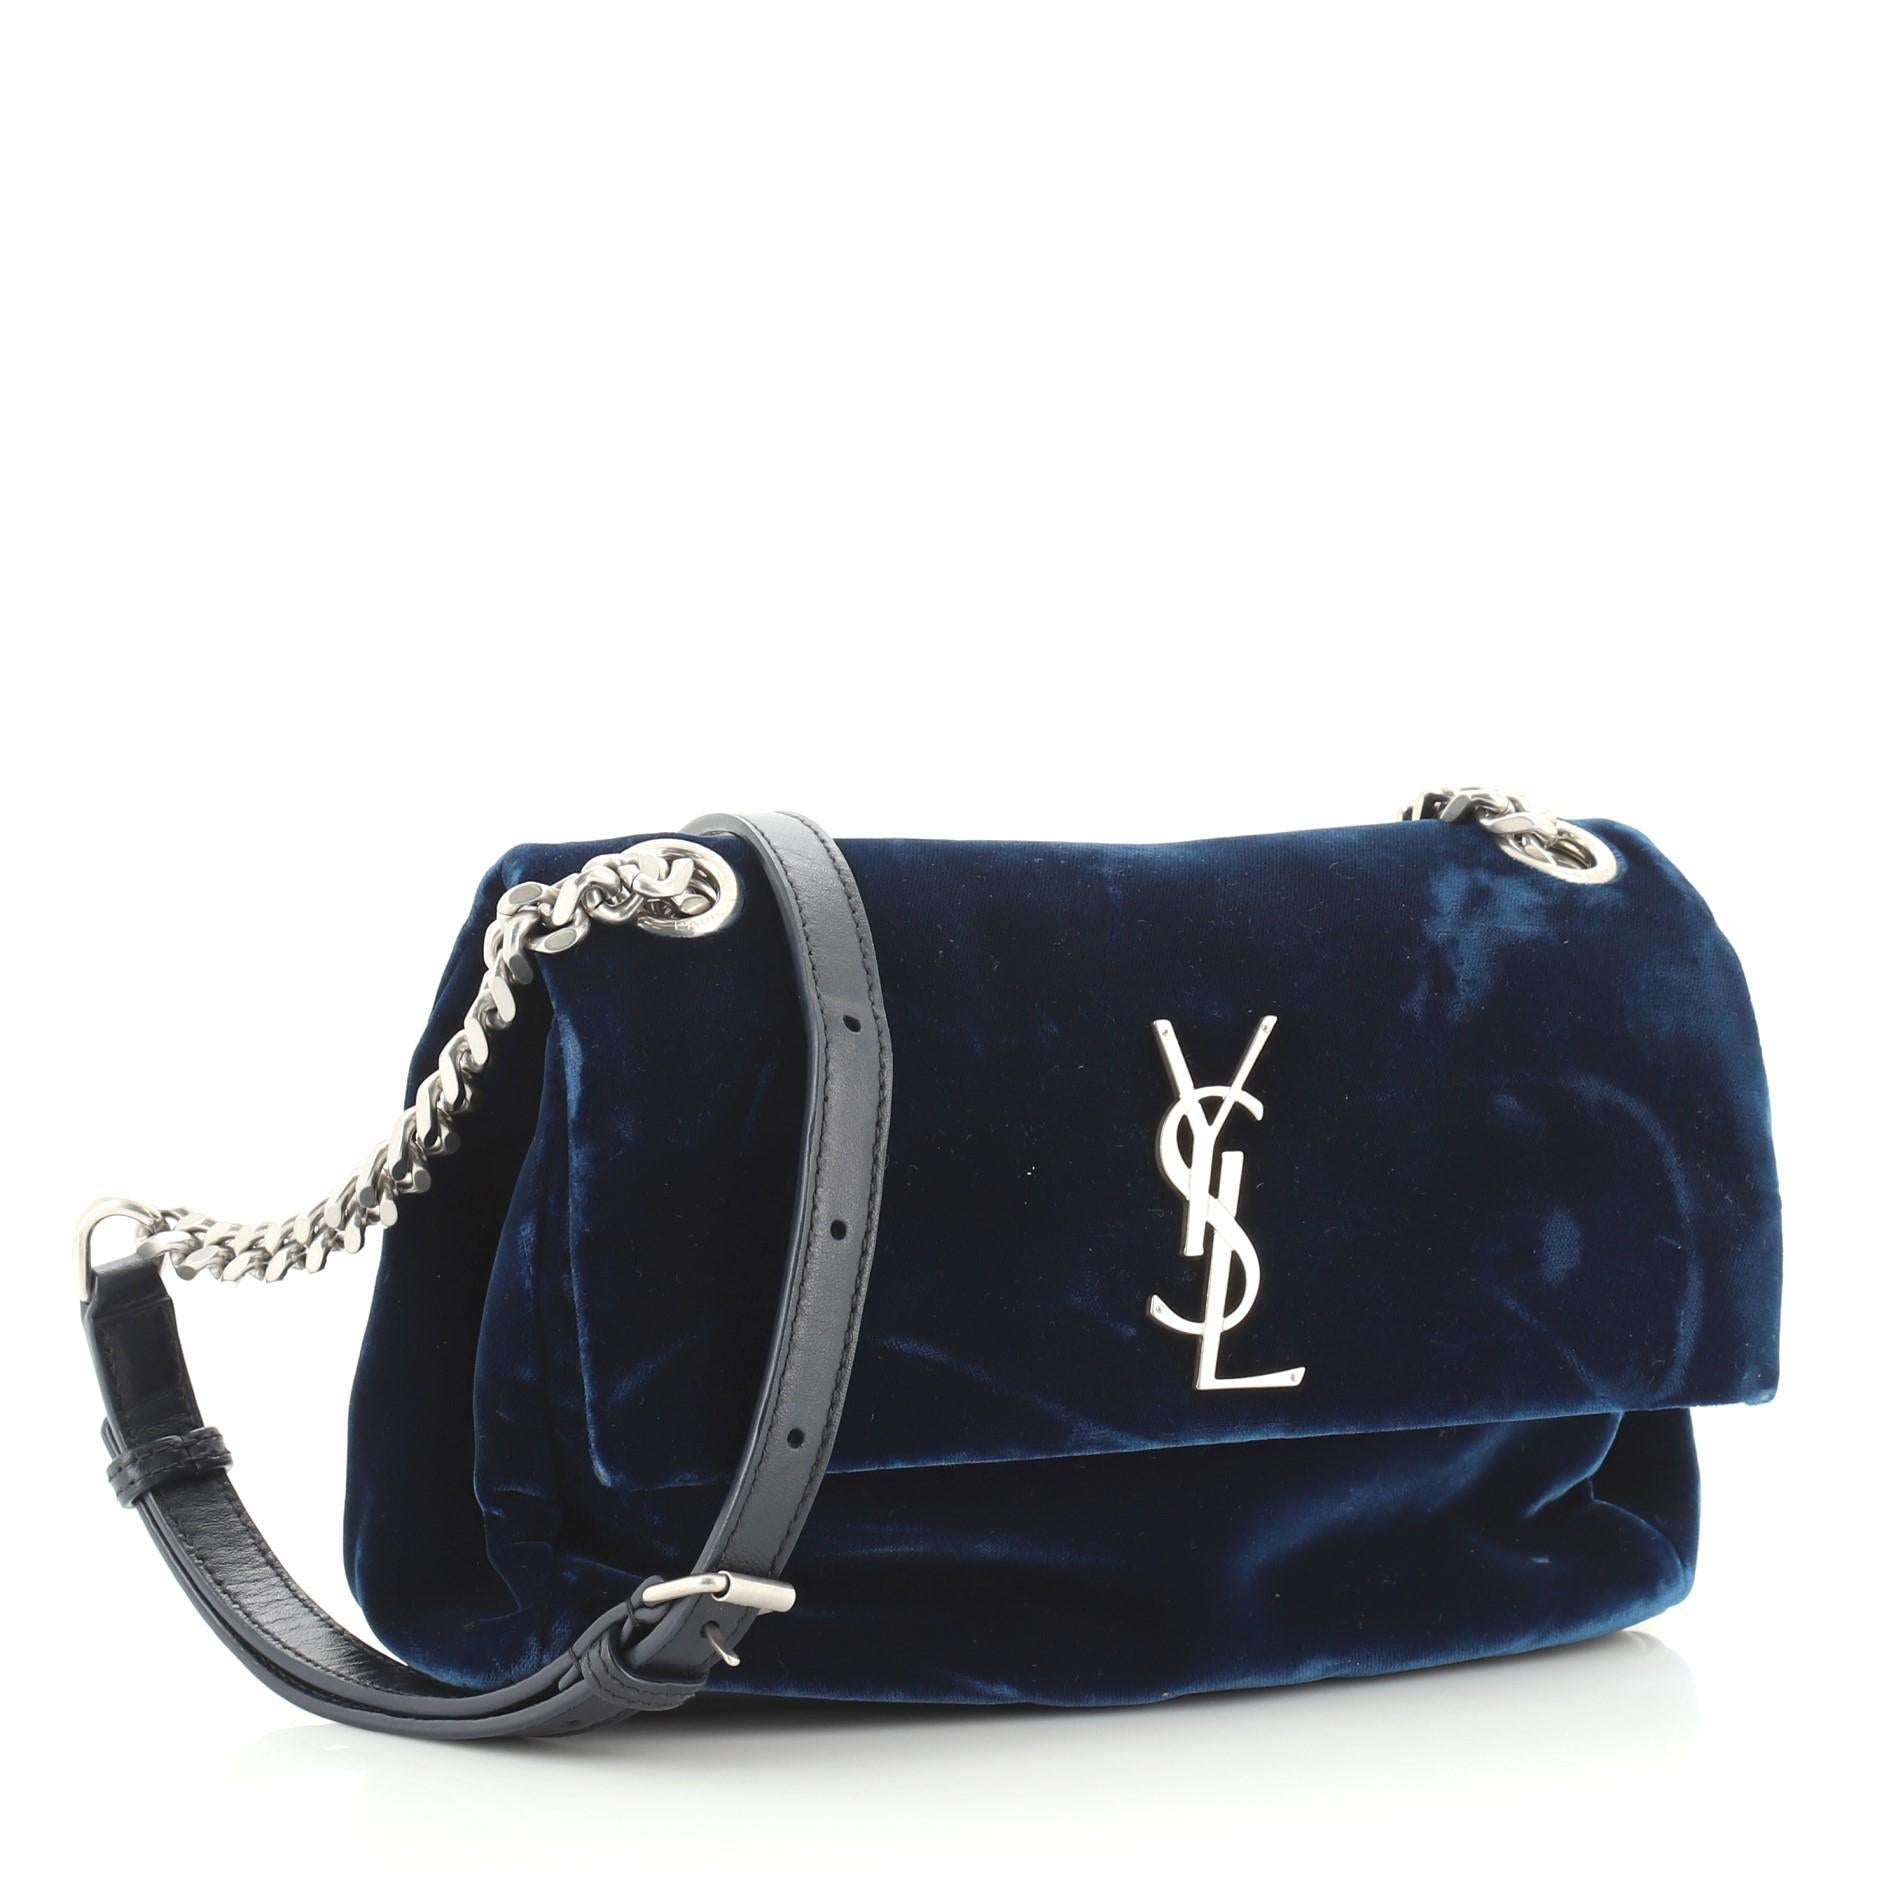 This Saint Laurent West Hollywood Shoulder Bag Velvet Small, crafted in blue velvet, features adjustable leather and chain shoulder strap, front flap with iconic YSL monogram logo and silver-tone hardware. Its magnetic snap button closure opens to a